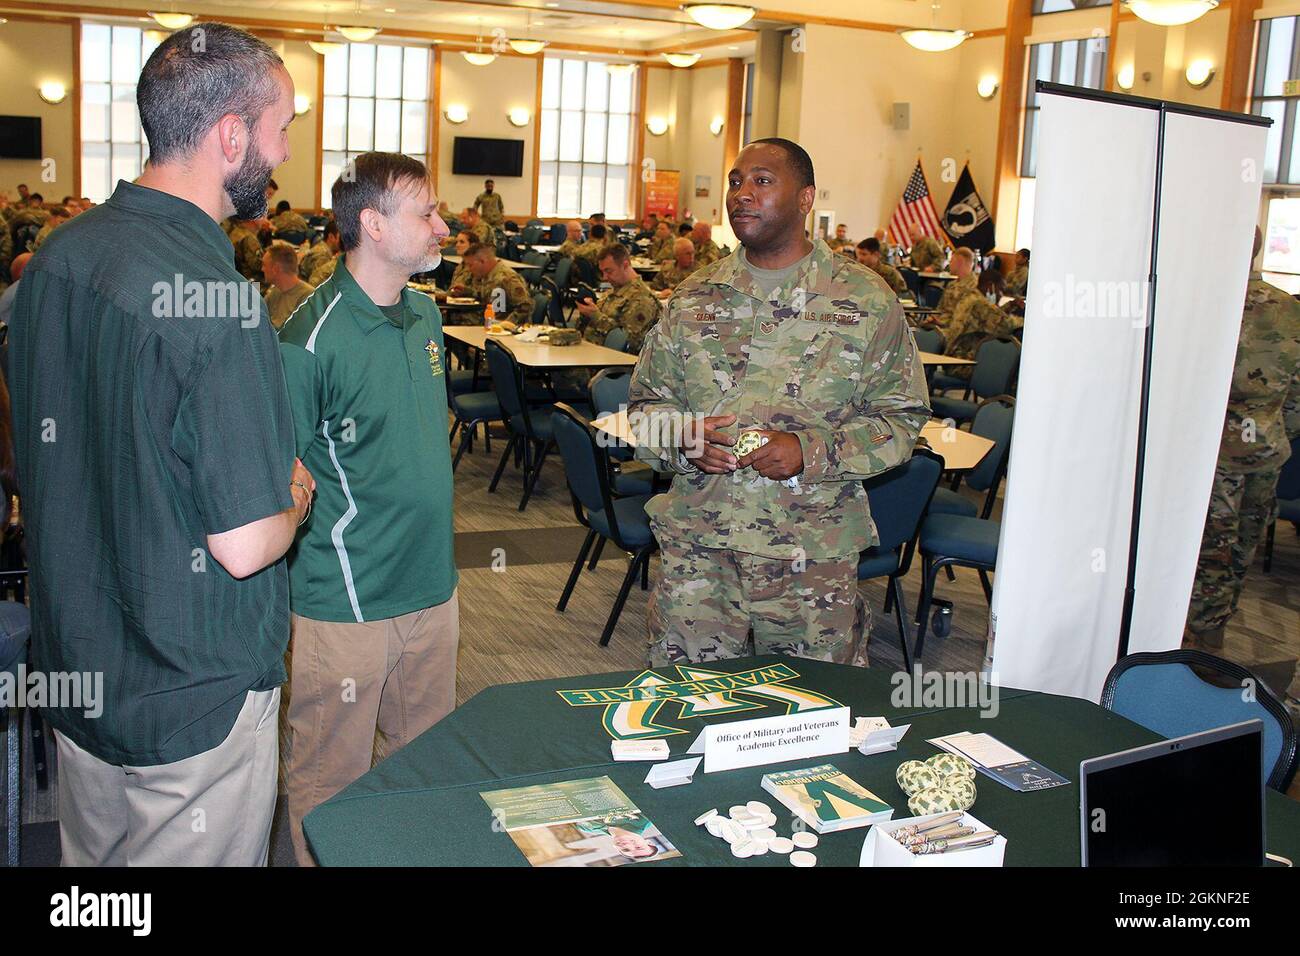 Staff Sgt. Greg Glenn, 127th Force Support Squadron, talks with representatives of Wayne State University, about support the university offers for veterans to attend college, while at Selfridge Air National Guard Base, Mich., June 5, 2021. Information from several universities and other agencies were avialable to military personnel during the lunch break as part of the Stay Guard program, which encourages Airmen to continue to serve in the Michigan Air National Guard. Stock Photo